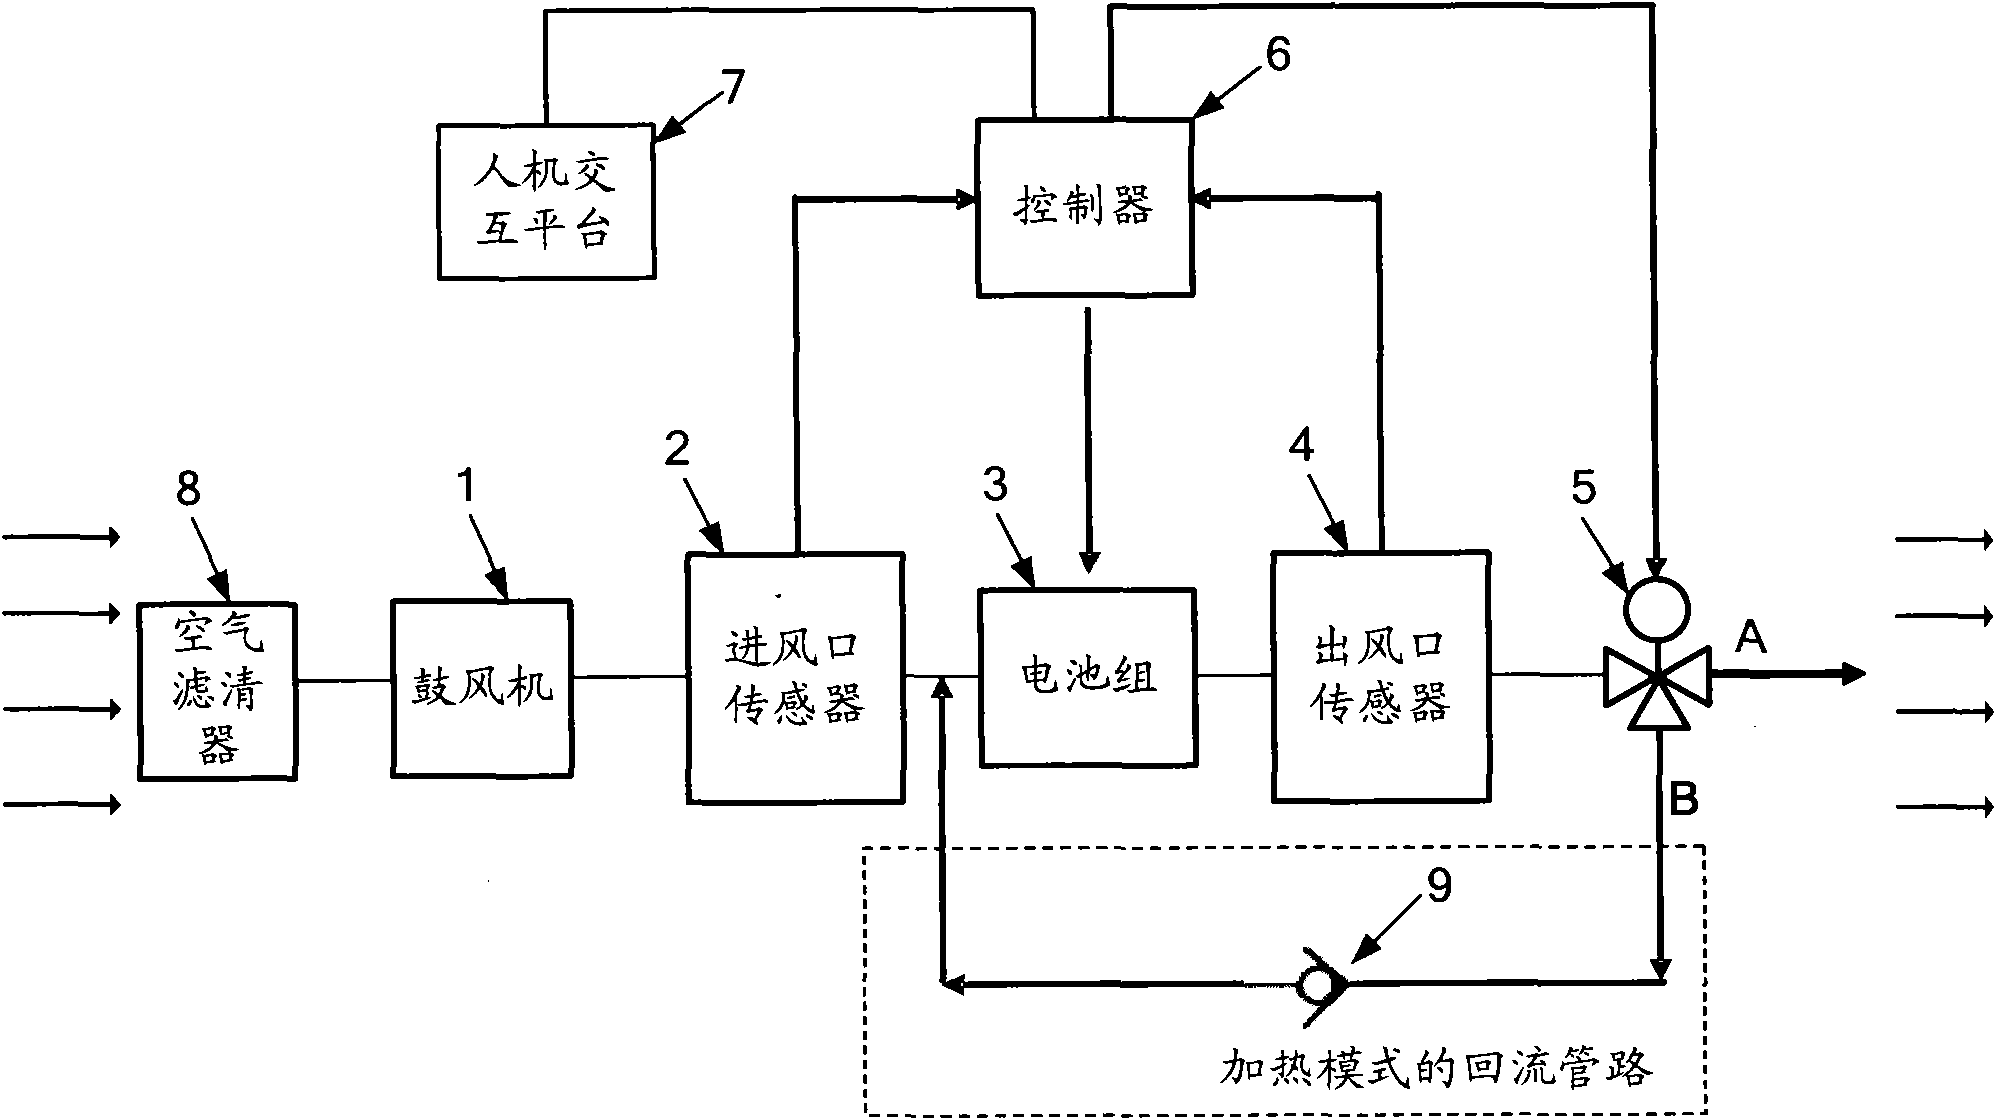 Method and system for controlling battery temperature of electric vehicle